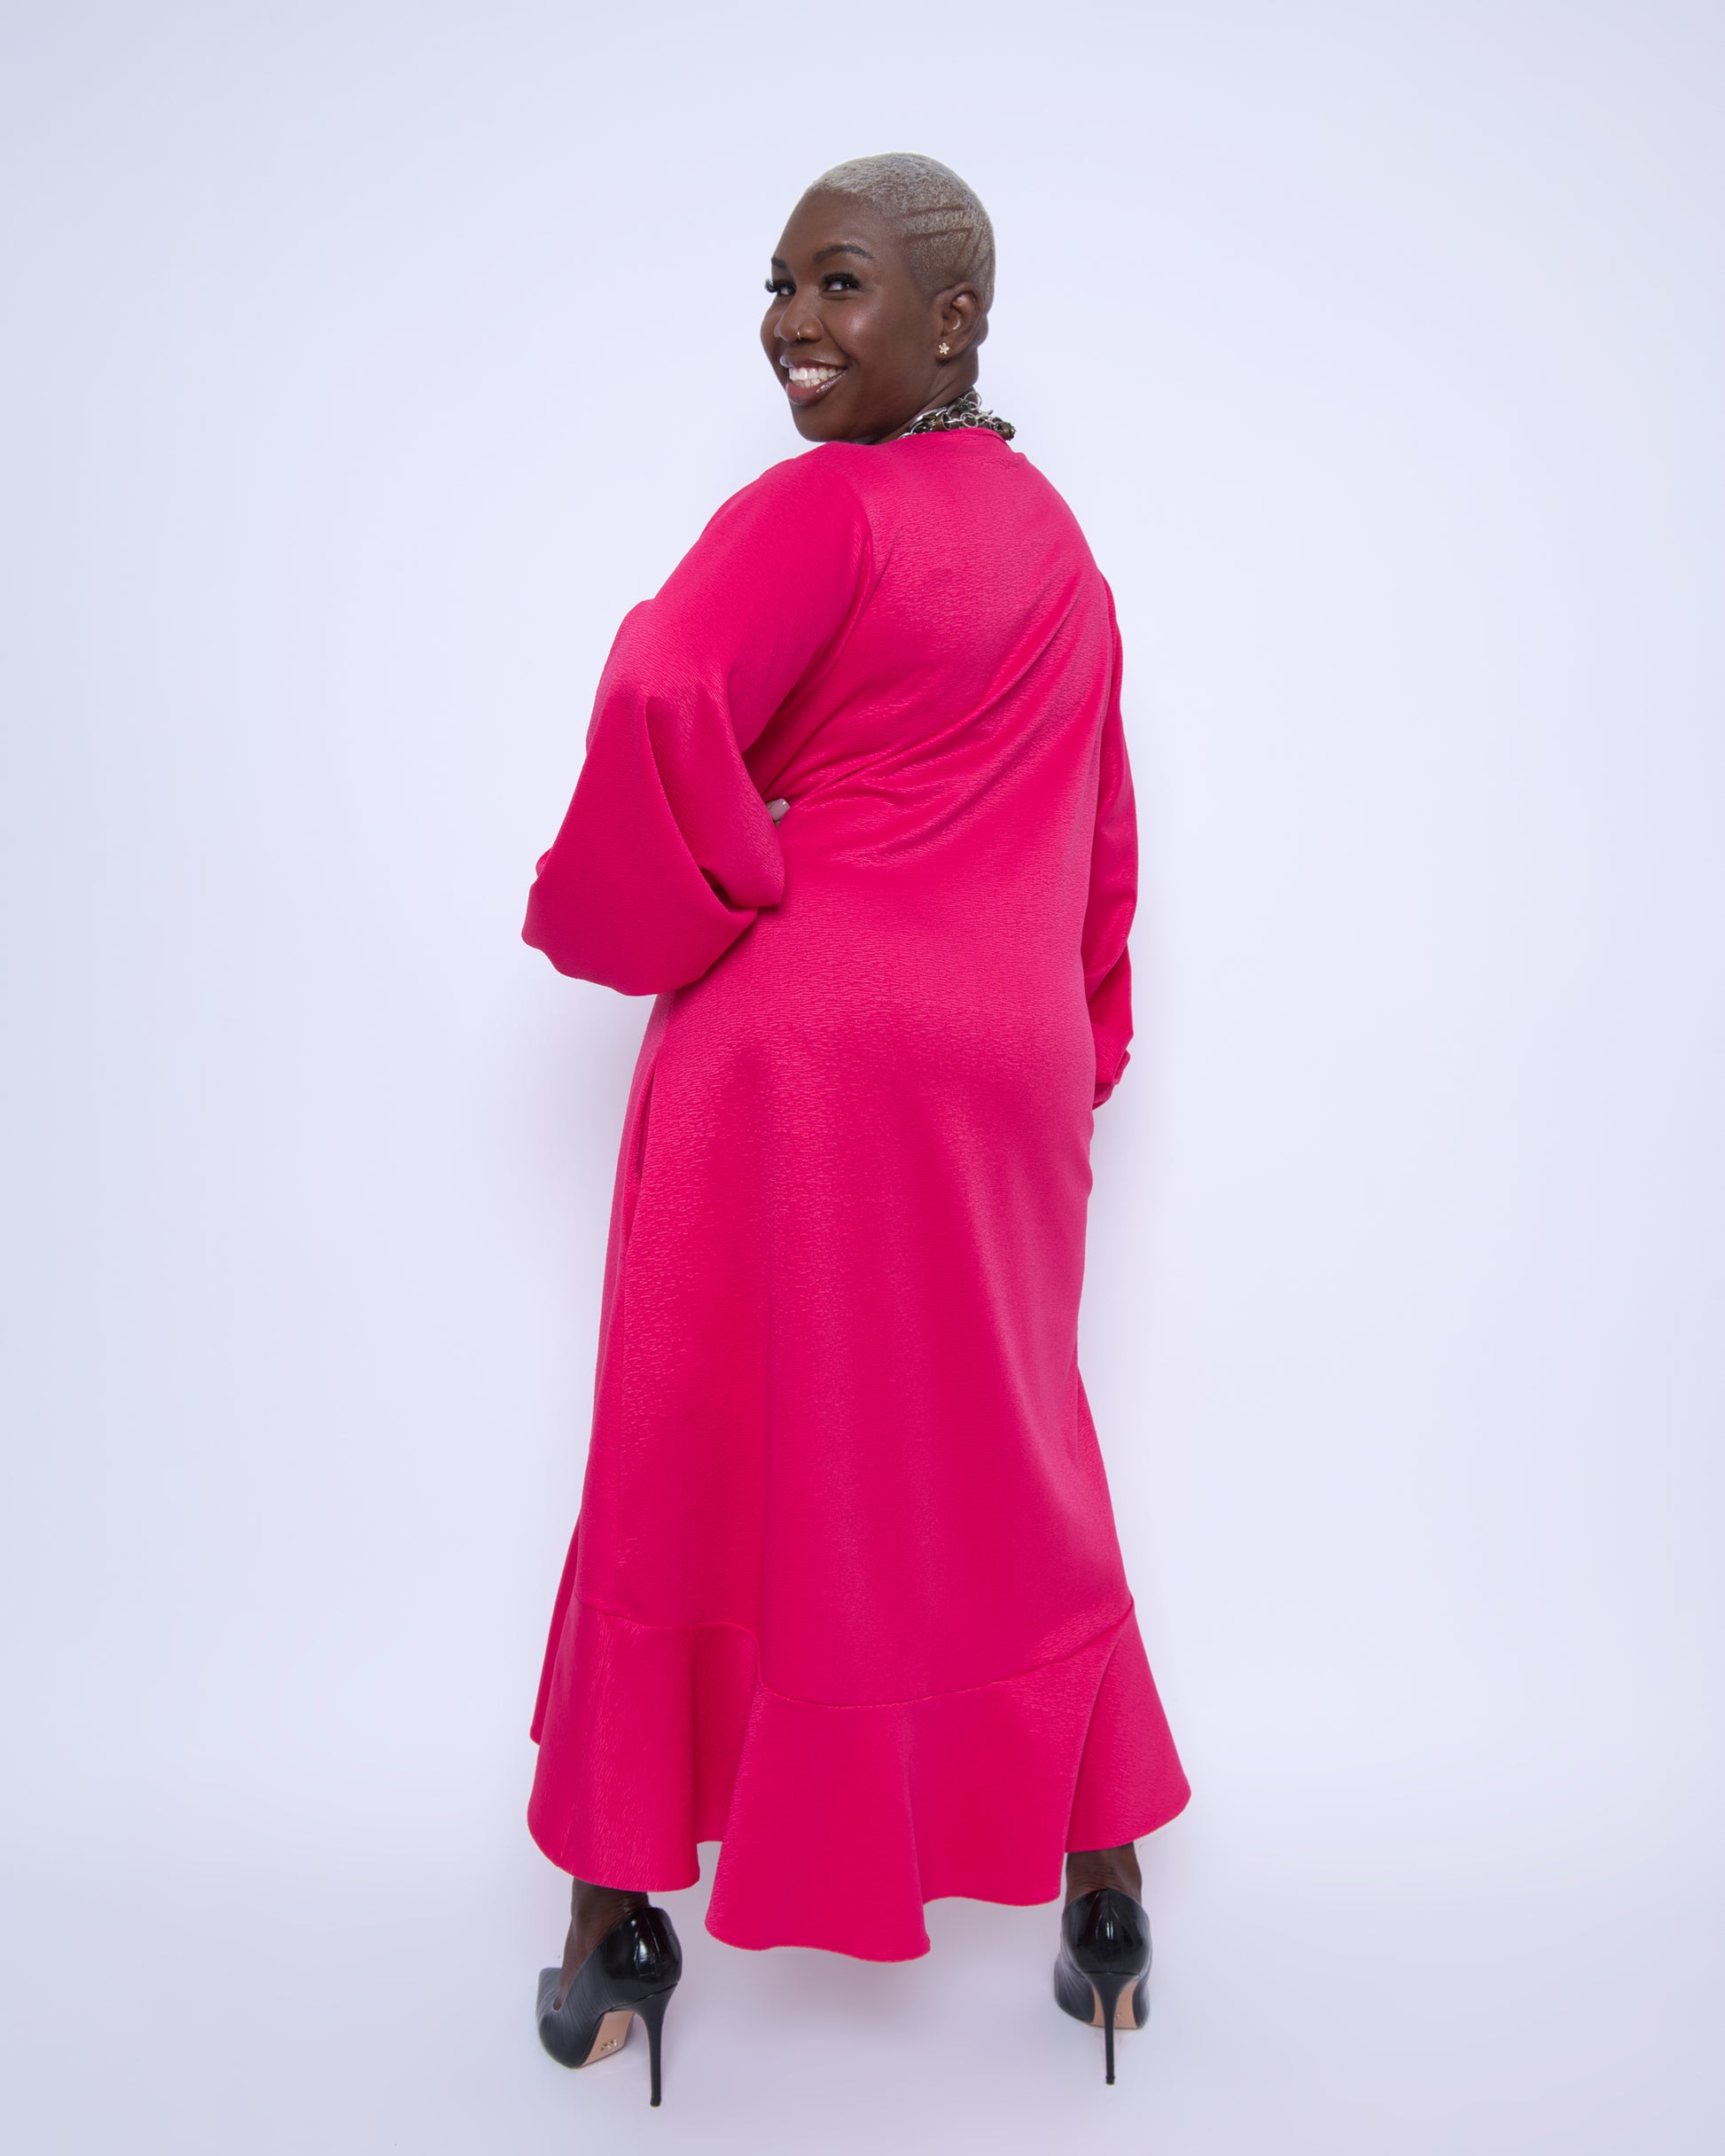 Women's Plus Size Pink Magenta Midi Dobby Jacquard shown from the back, styled with black heels for an elegant and sophisticated ensemble.